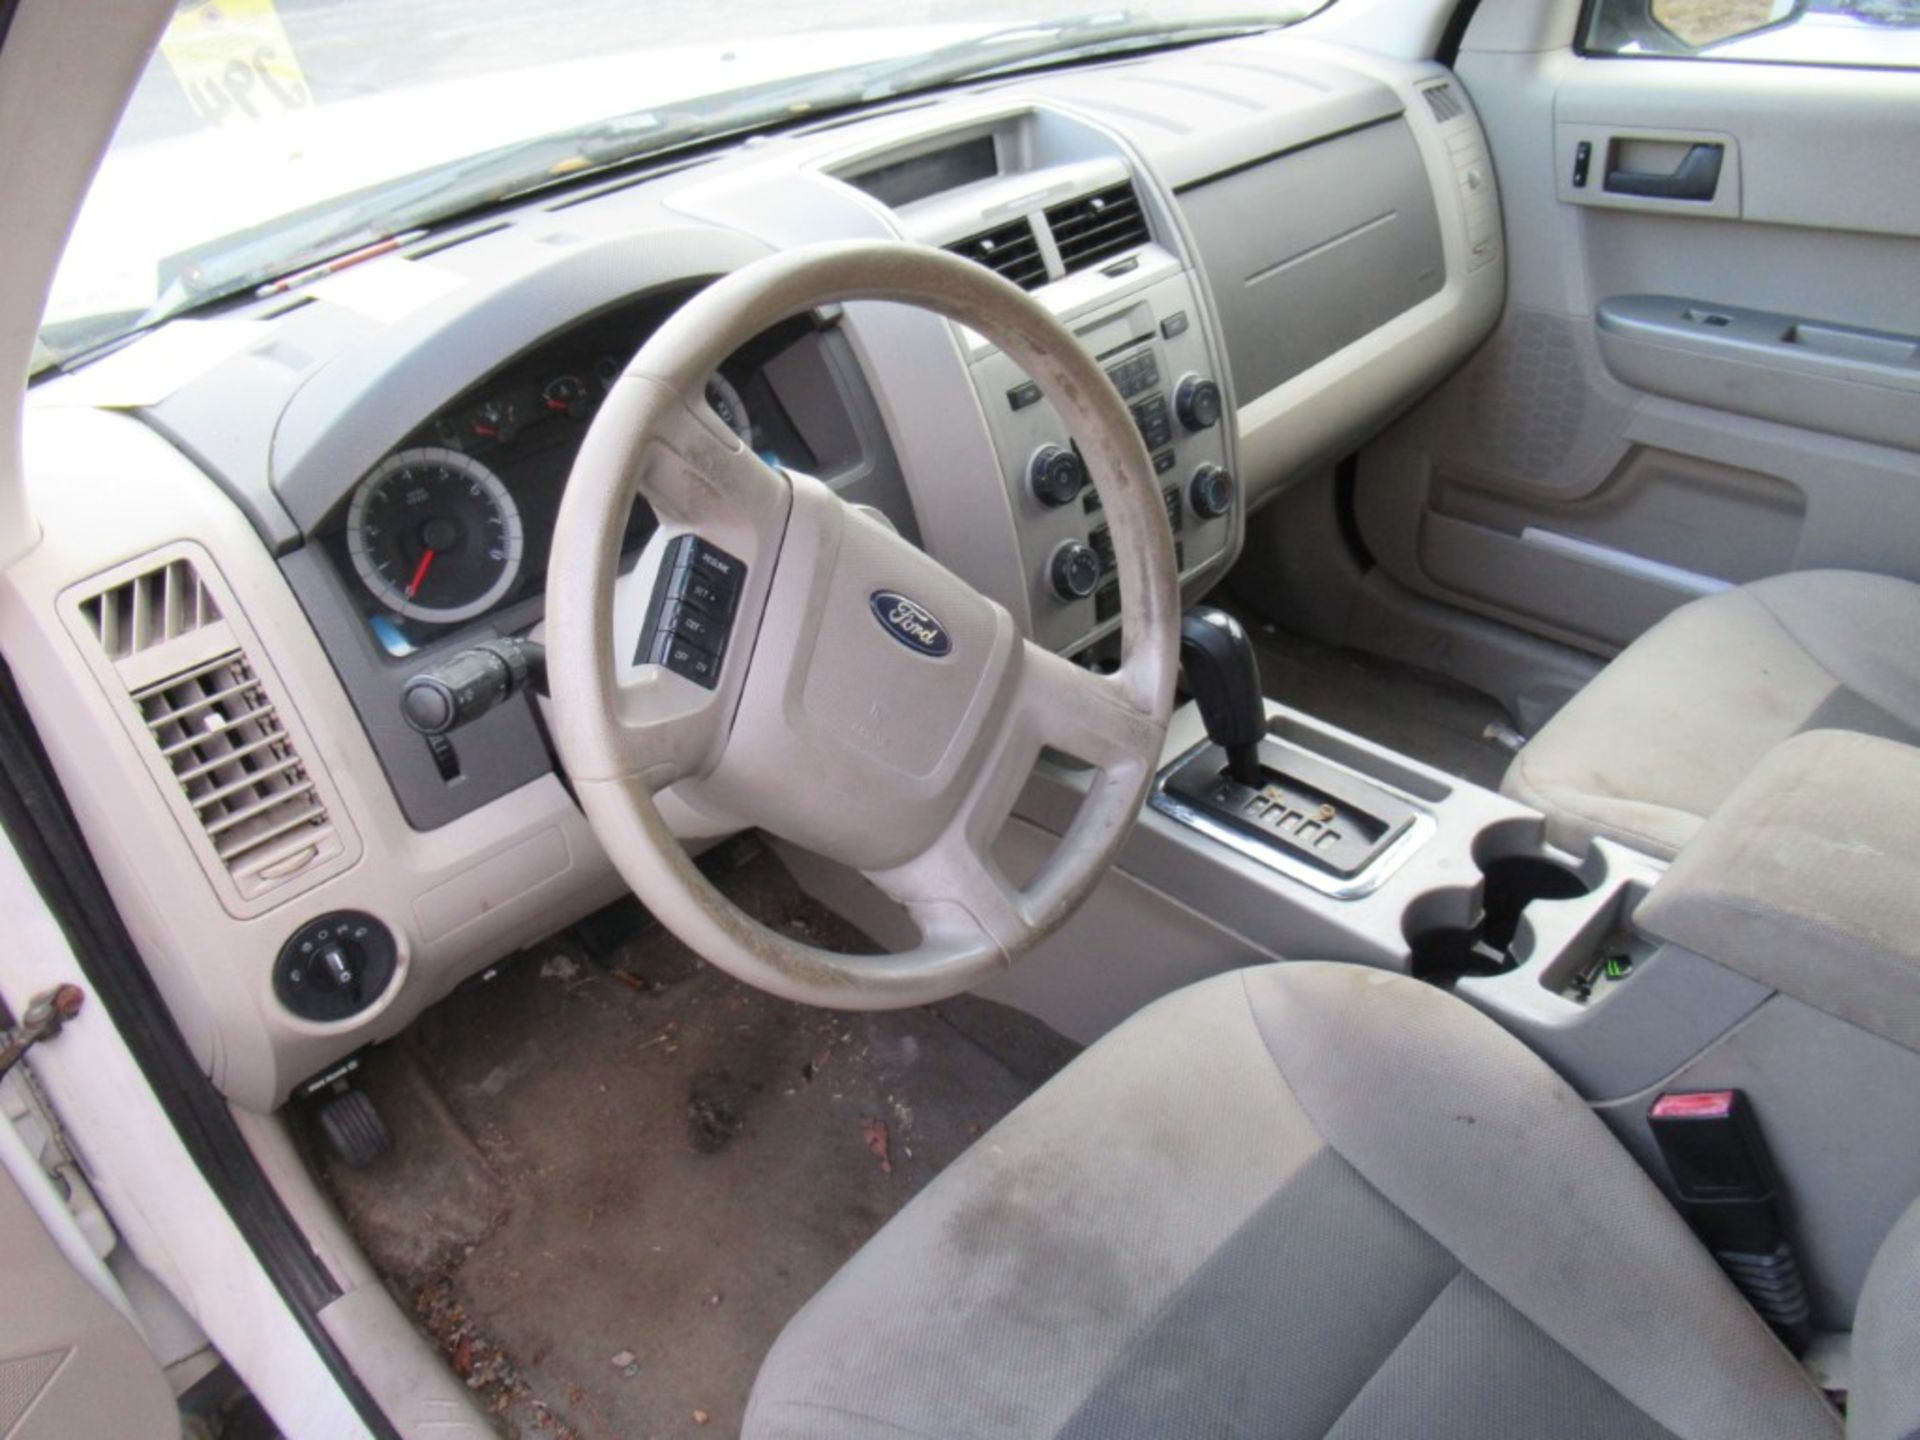 2008 Ford Escape XLT SUV , VIN 1FMCU02118KD90320, Automatic, Cruise Control, AC, PW, PL, PS, AM/FM/ - Image 26 of 31